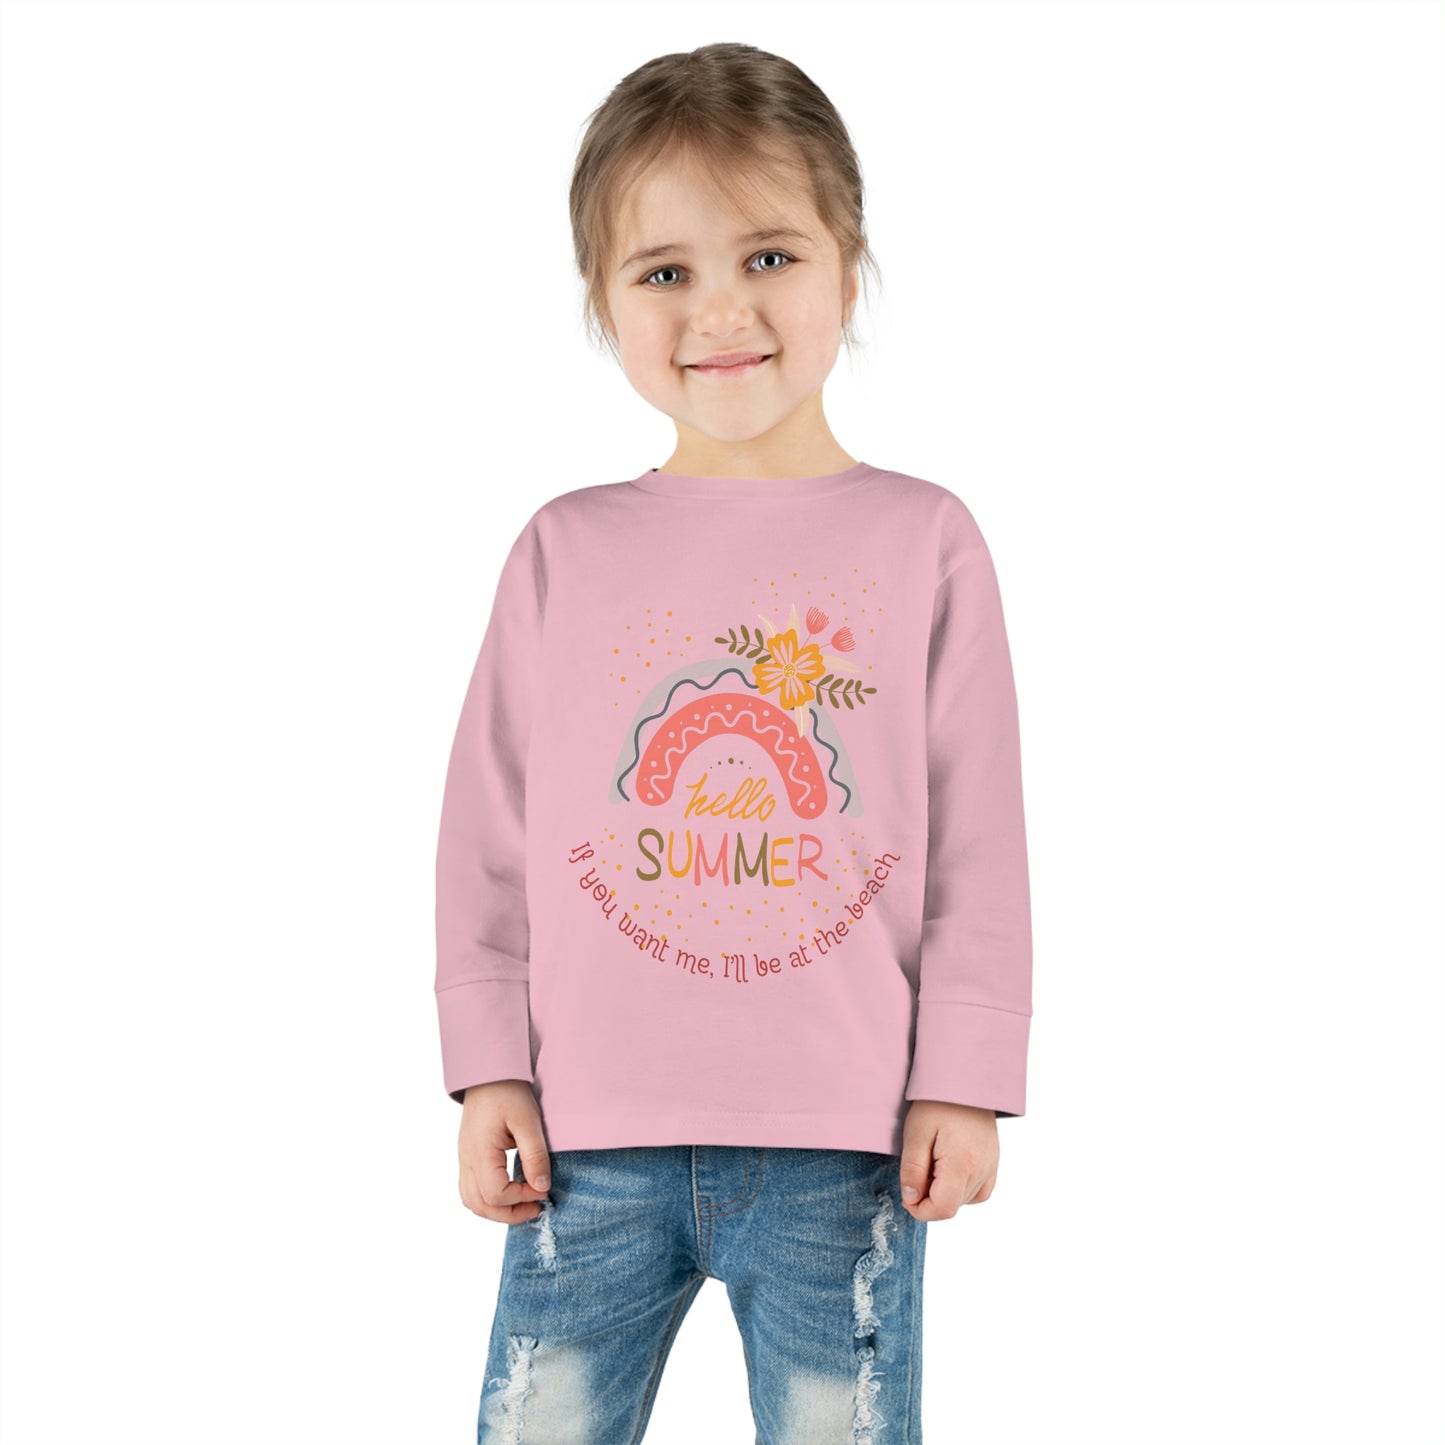 ‘If you want me, I’ll be at the beach’ Printed Front & Back. Toddler Long Sleeve Tee